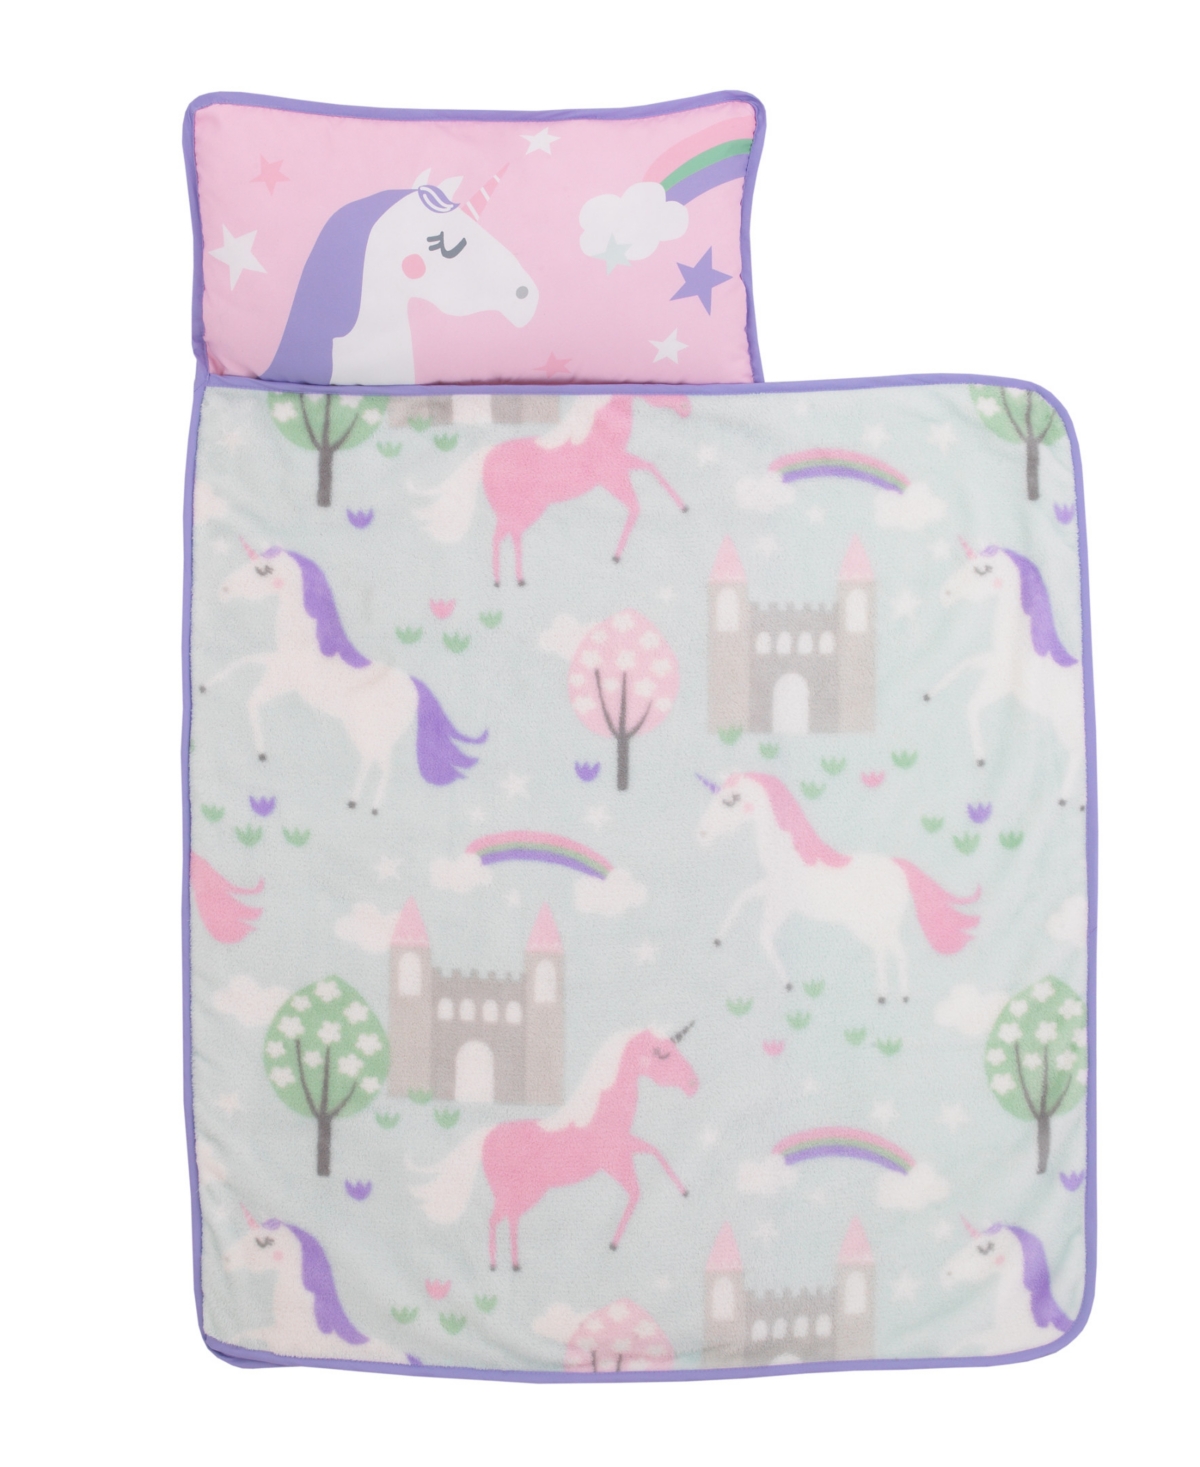 Everything Kids Unicorn Nap Mat with Pillow and Blanket Bedding